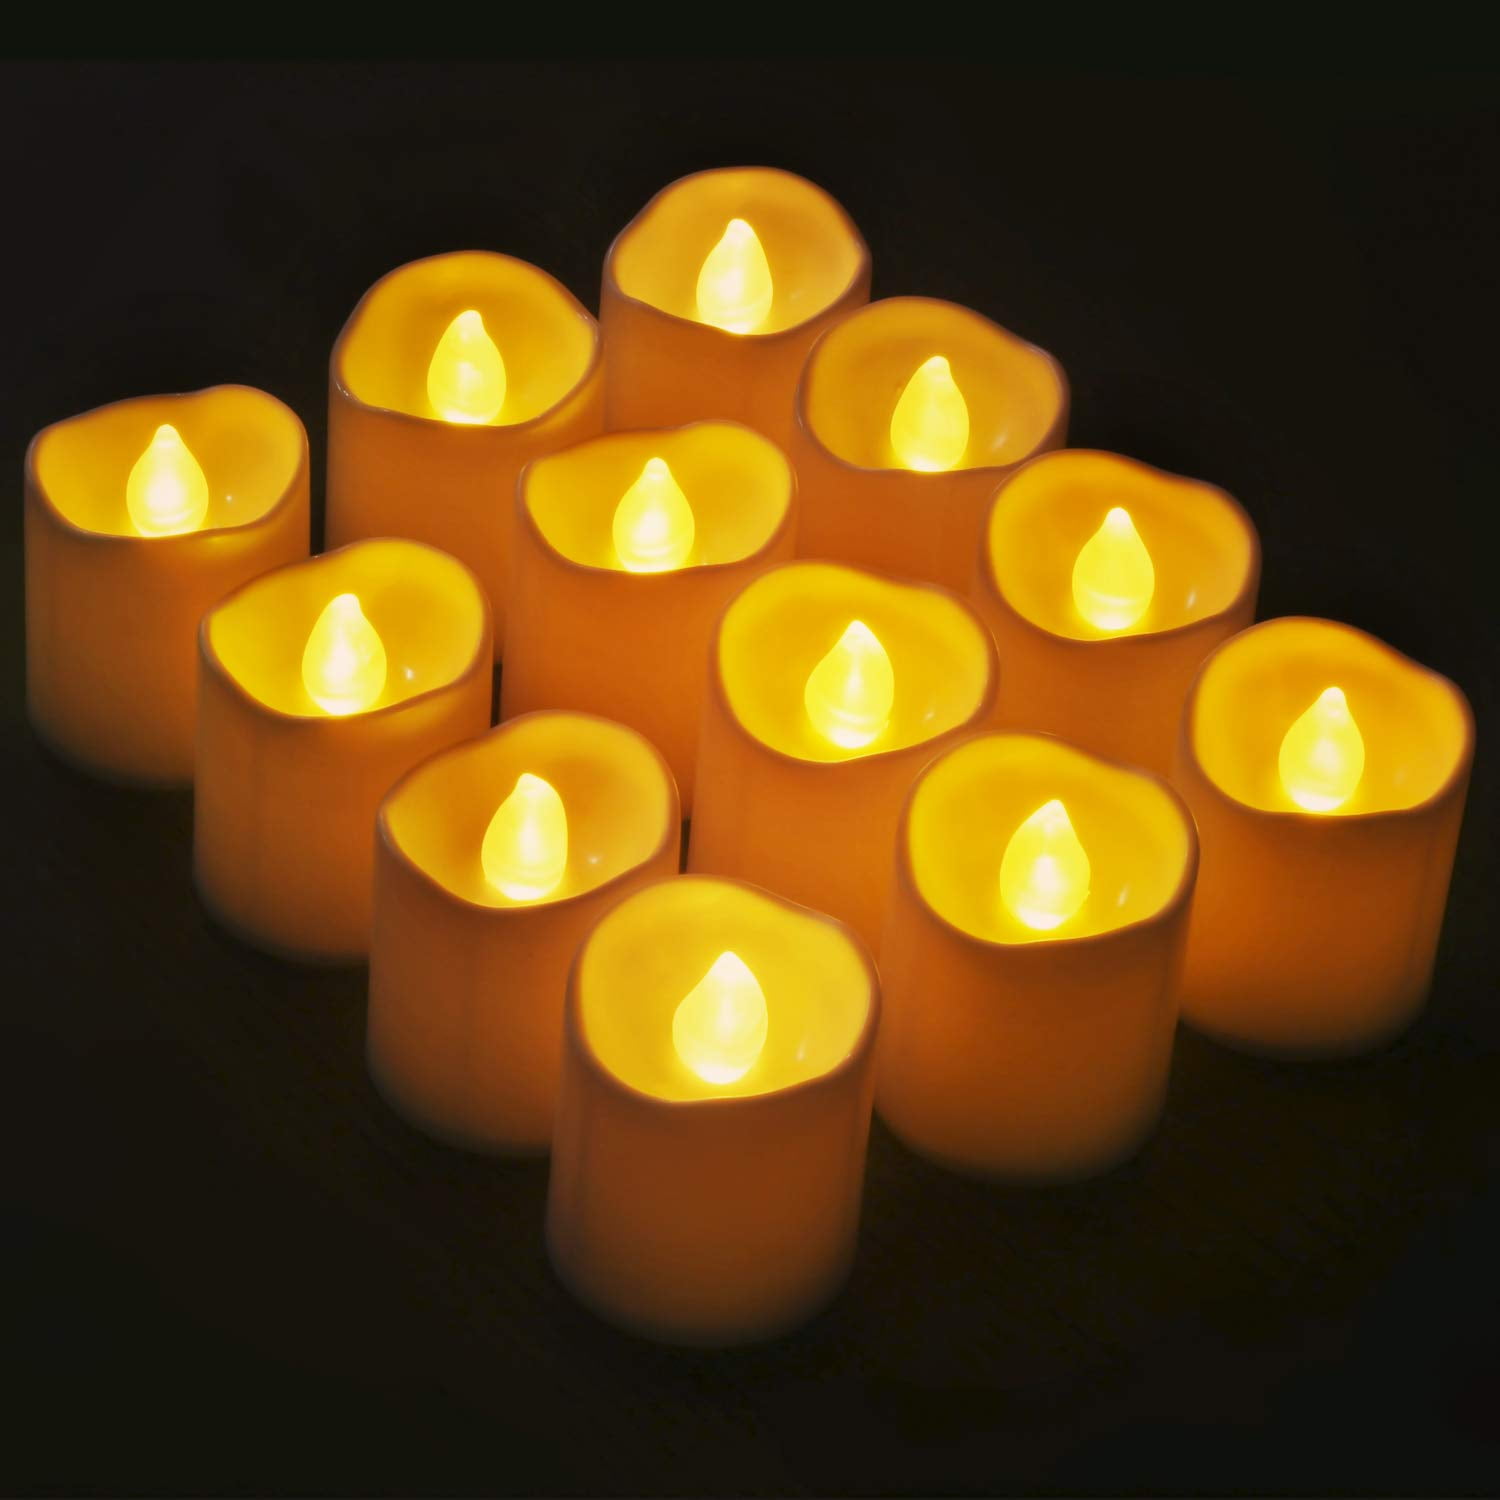 Flickering Battery Operated Flameless LED Tea Lights Votive Candles w/ Timer 